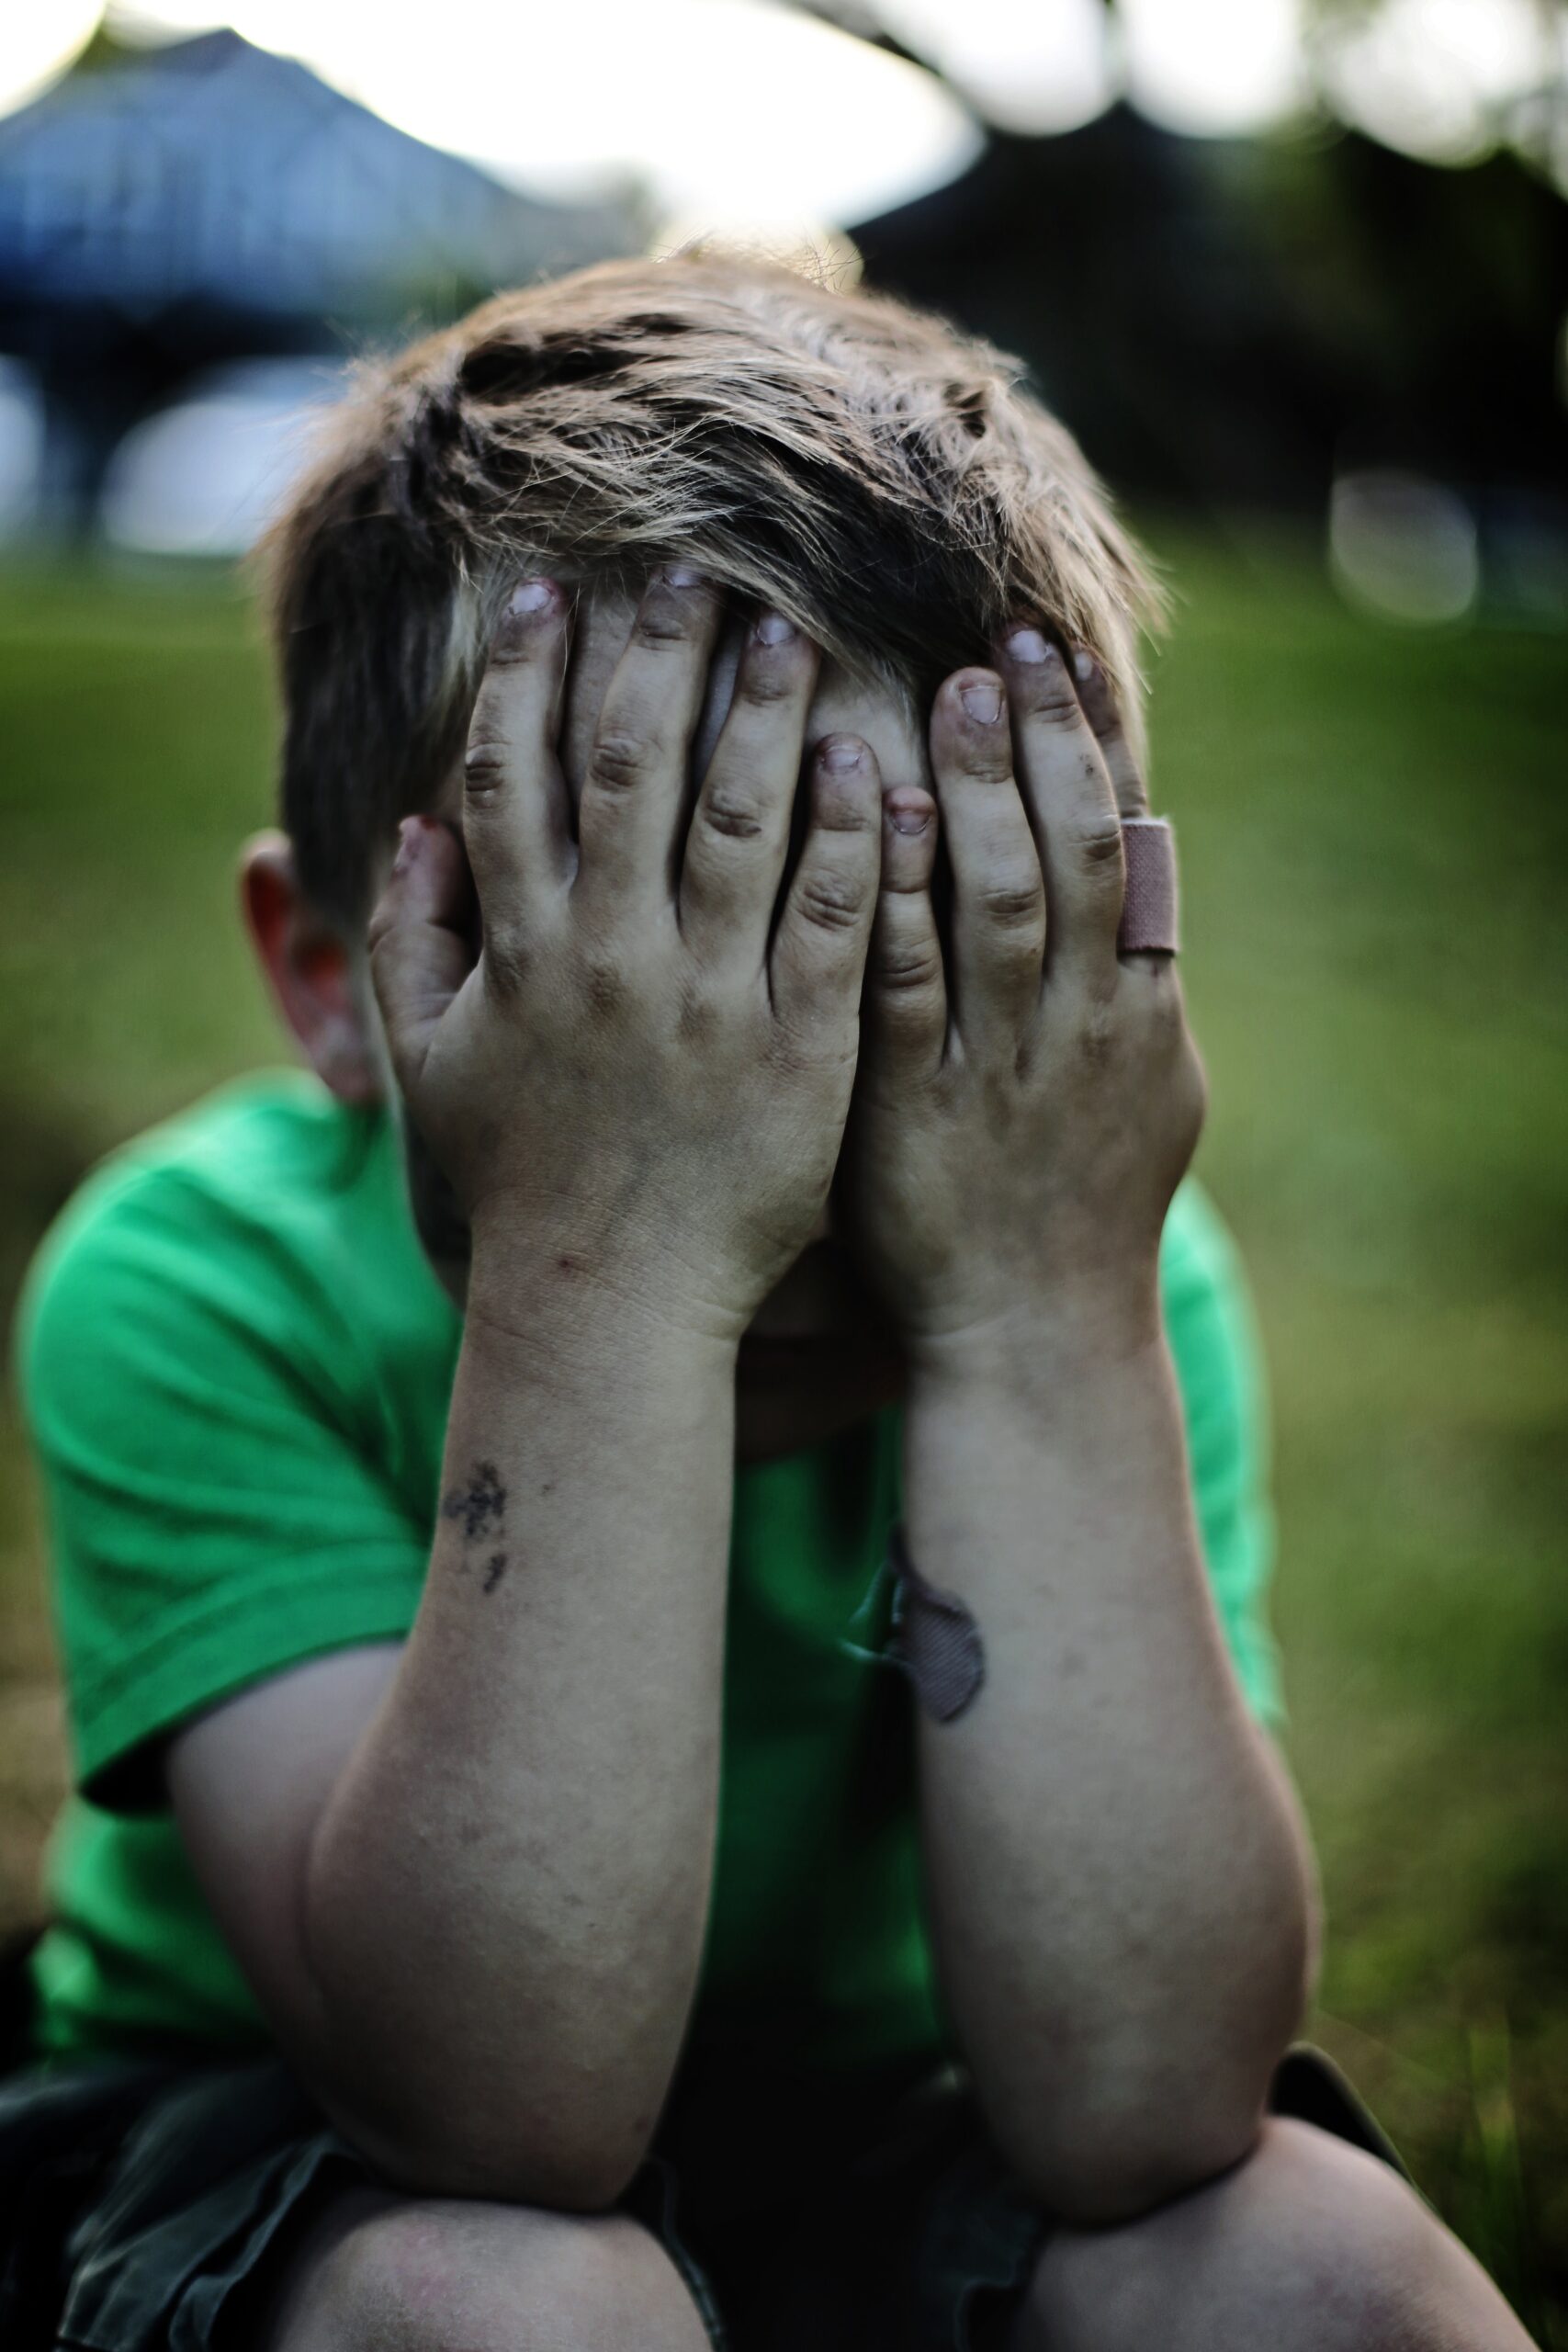 What To Do When Your Kid Has a Bad Attitude